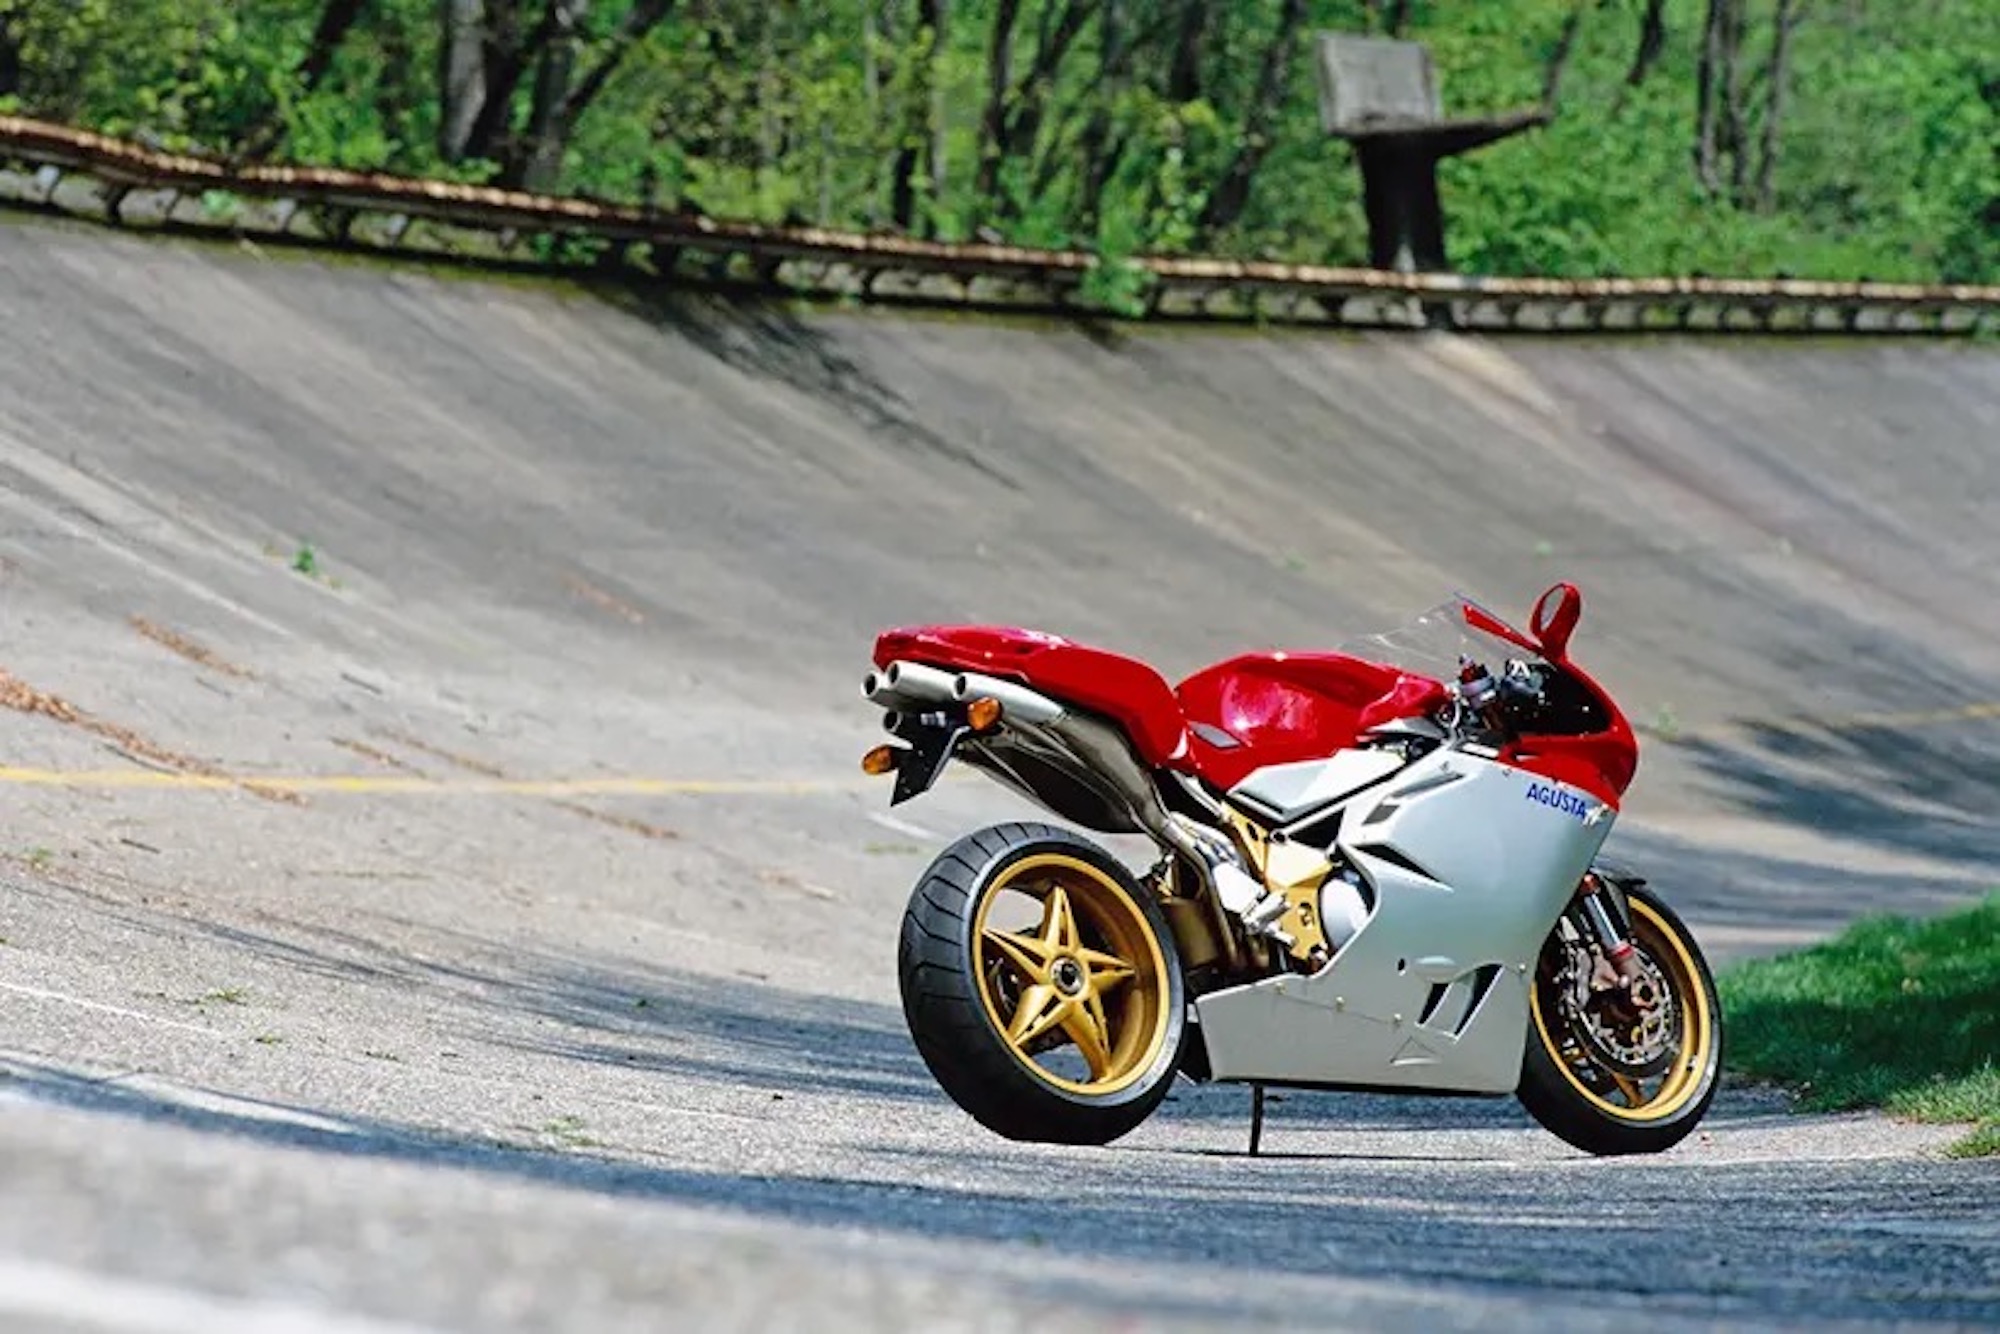 A bigger motorcycle build courtesy of MV Agusta. Media sourced from MCN. 